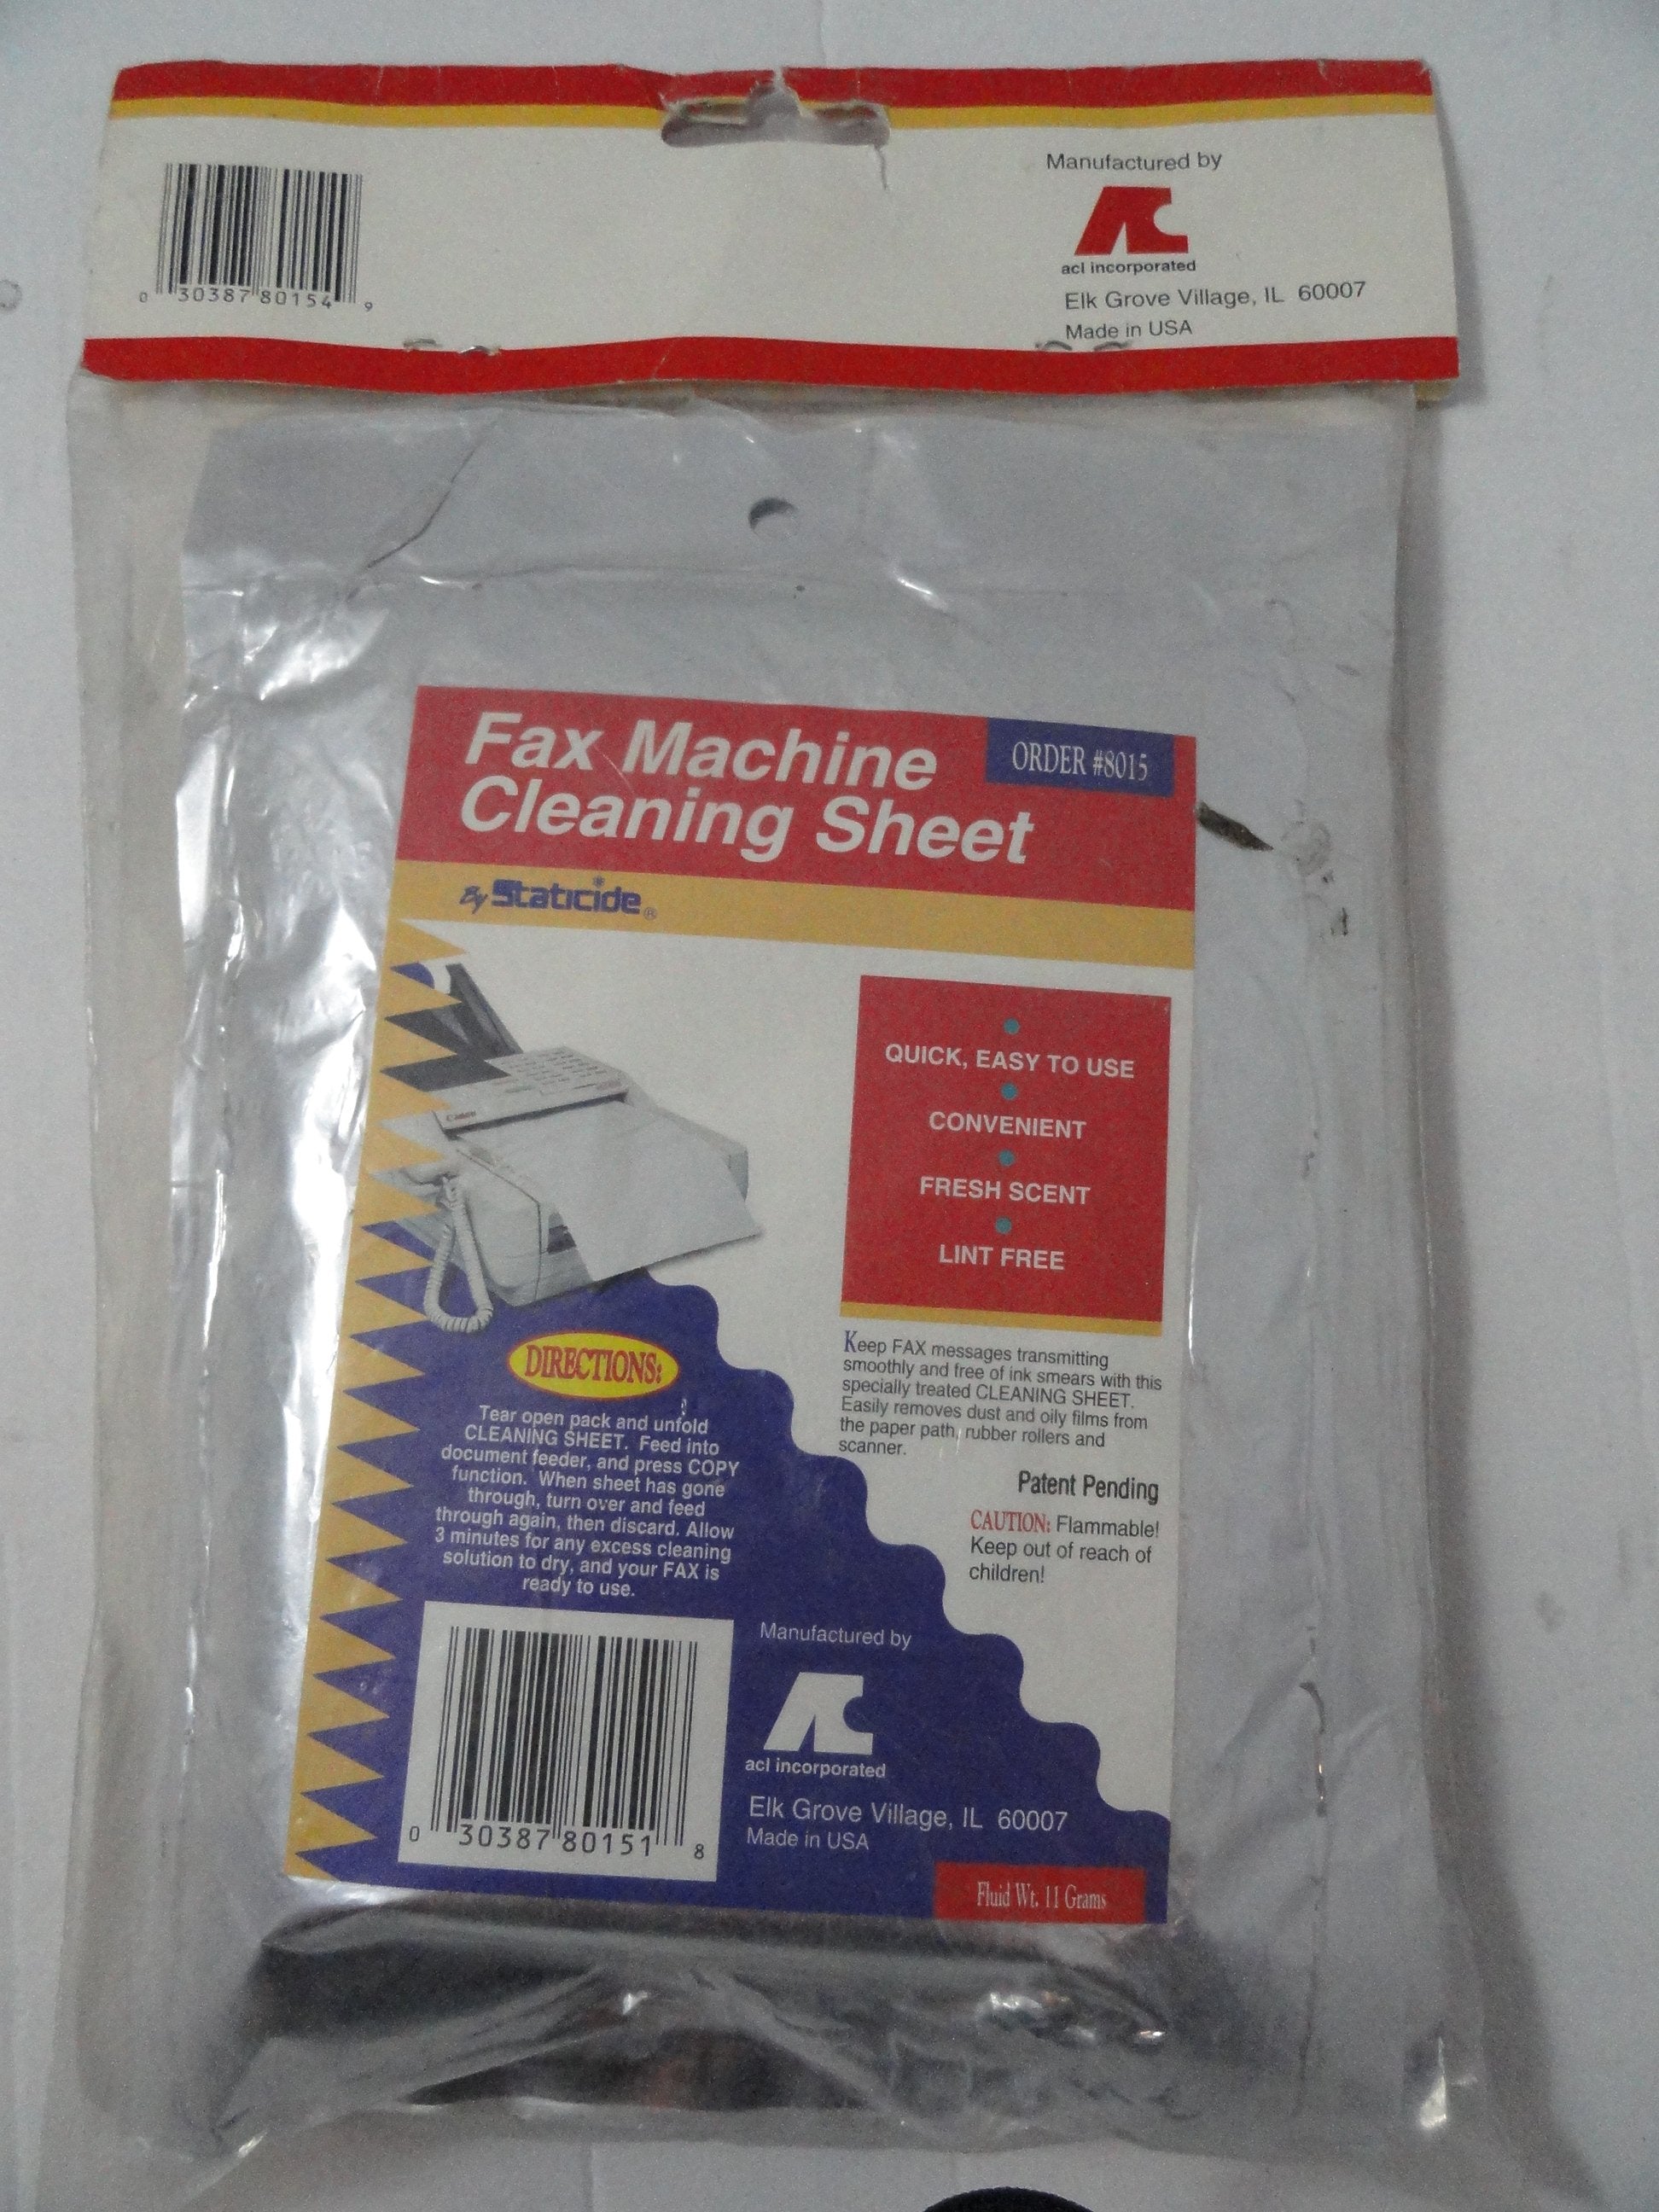 8015-4PK - Staticide 4 Pack of Lint Free Fax Machine Cleaning Paper - Refurbished